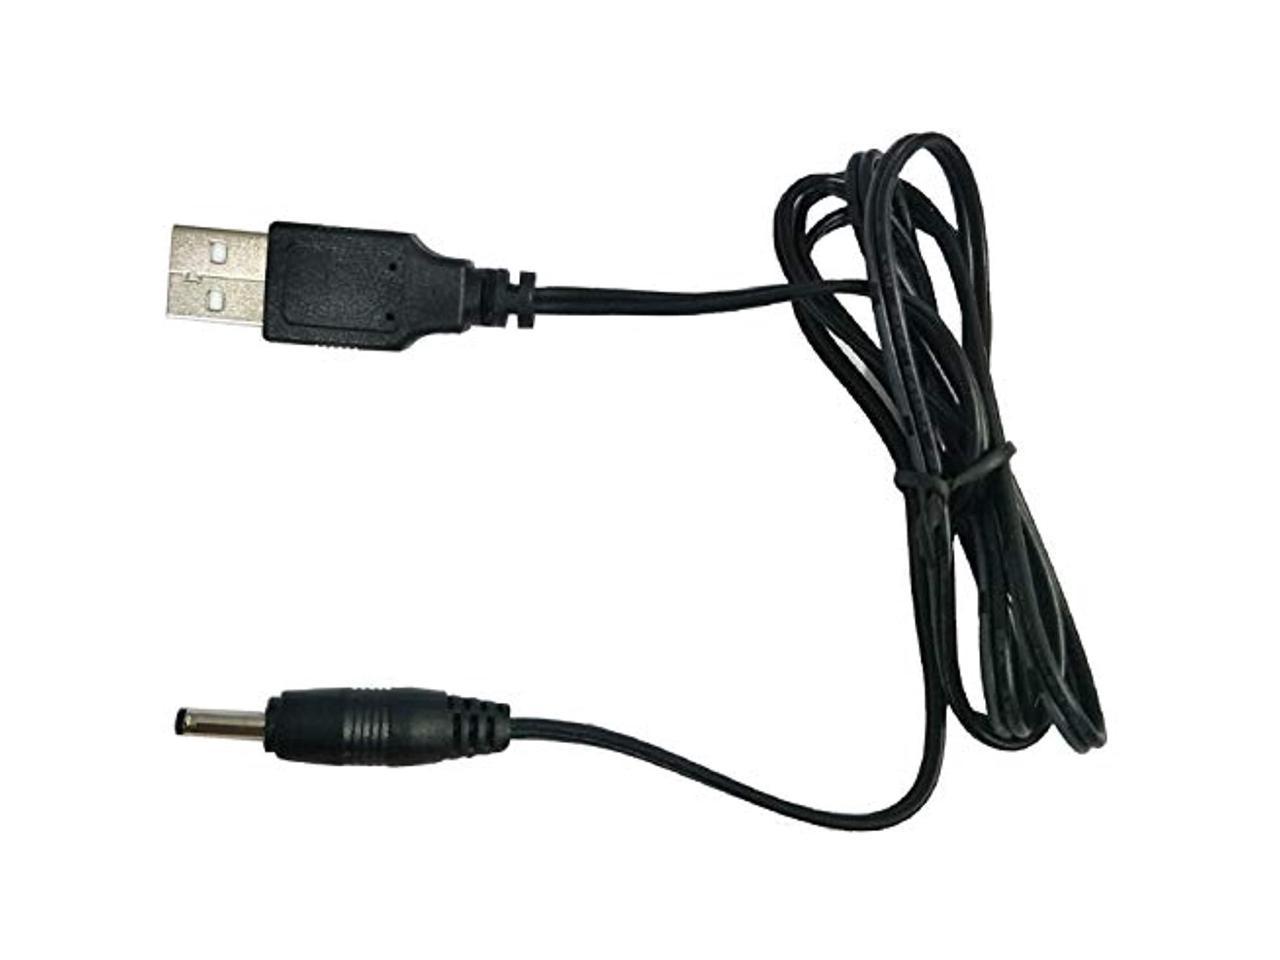 SLLEA USB PC Power Supply Charging Charger Cable Cord Lead for Aluratek APMP100F APMP101F CINEPAL HD Media Player